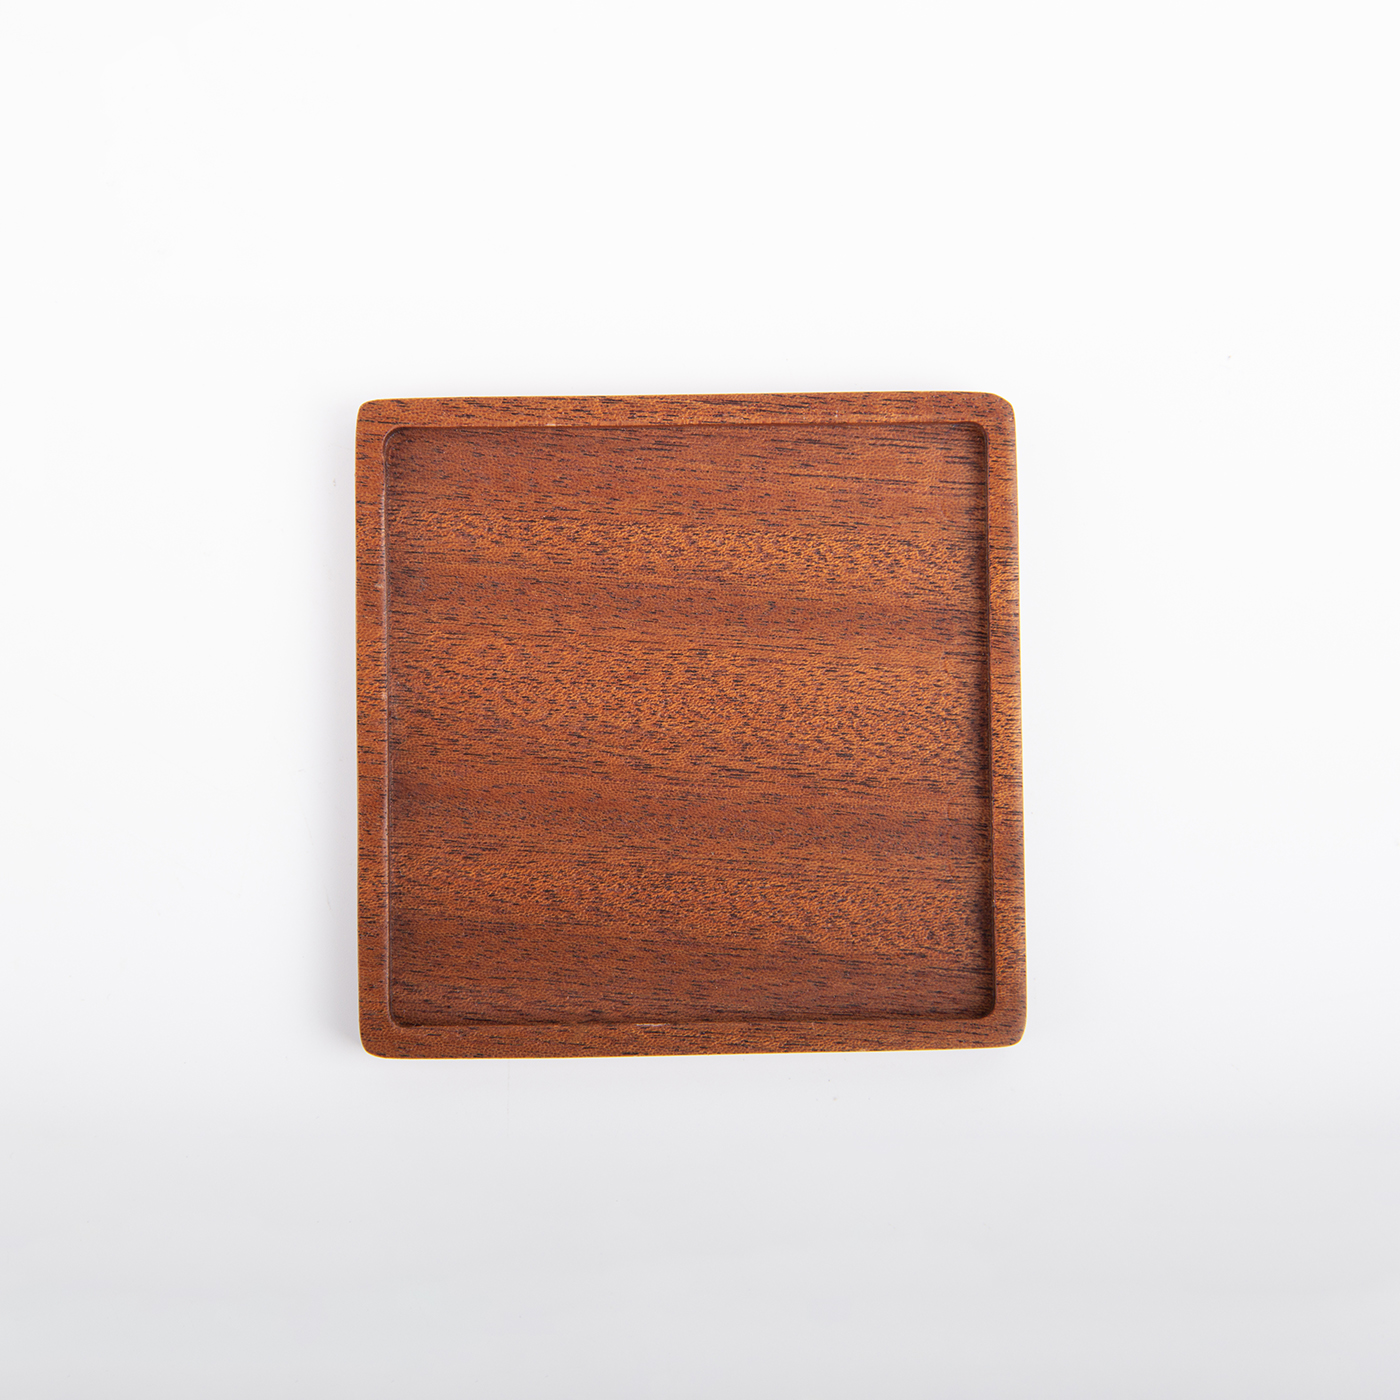 Wood Pad For Cup With Groove2